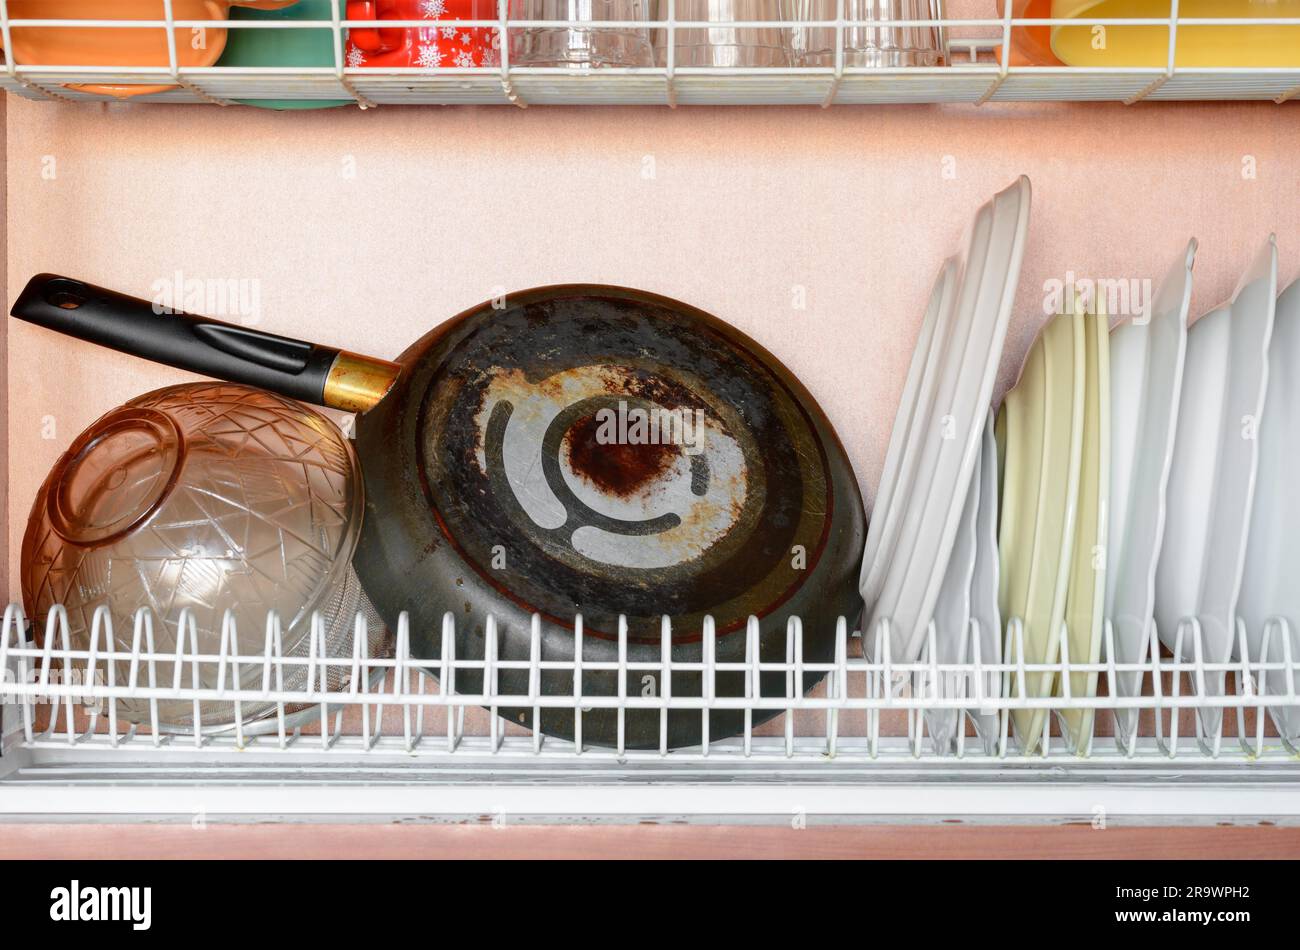 https://c8.alamy.com/comp/2R9WPH2/drying-dishes-pan-cups-and-glasses-in-the-dish-rack-2R9WPH2.jpg